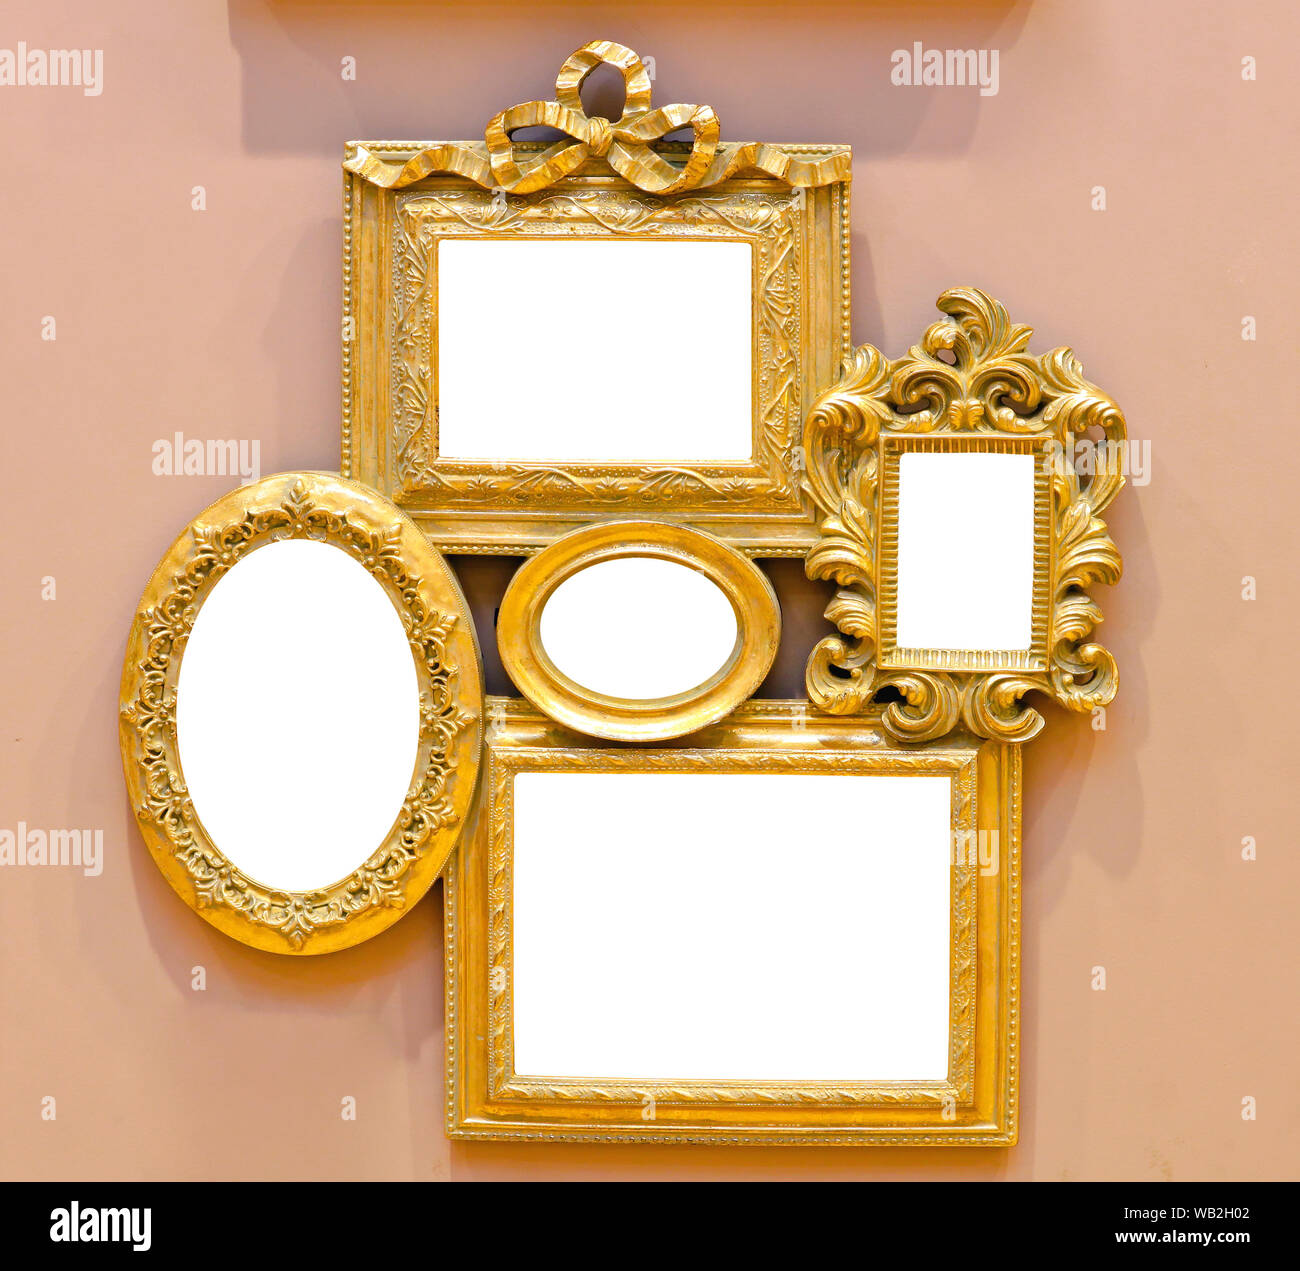 Collage of Antique Golden Multi Frames at Wall Stock Photo - Alamy